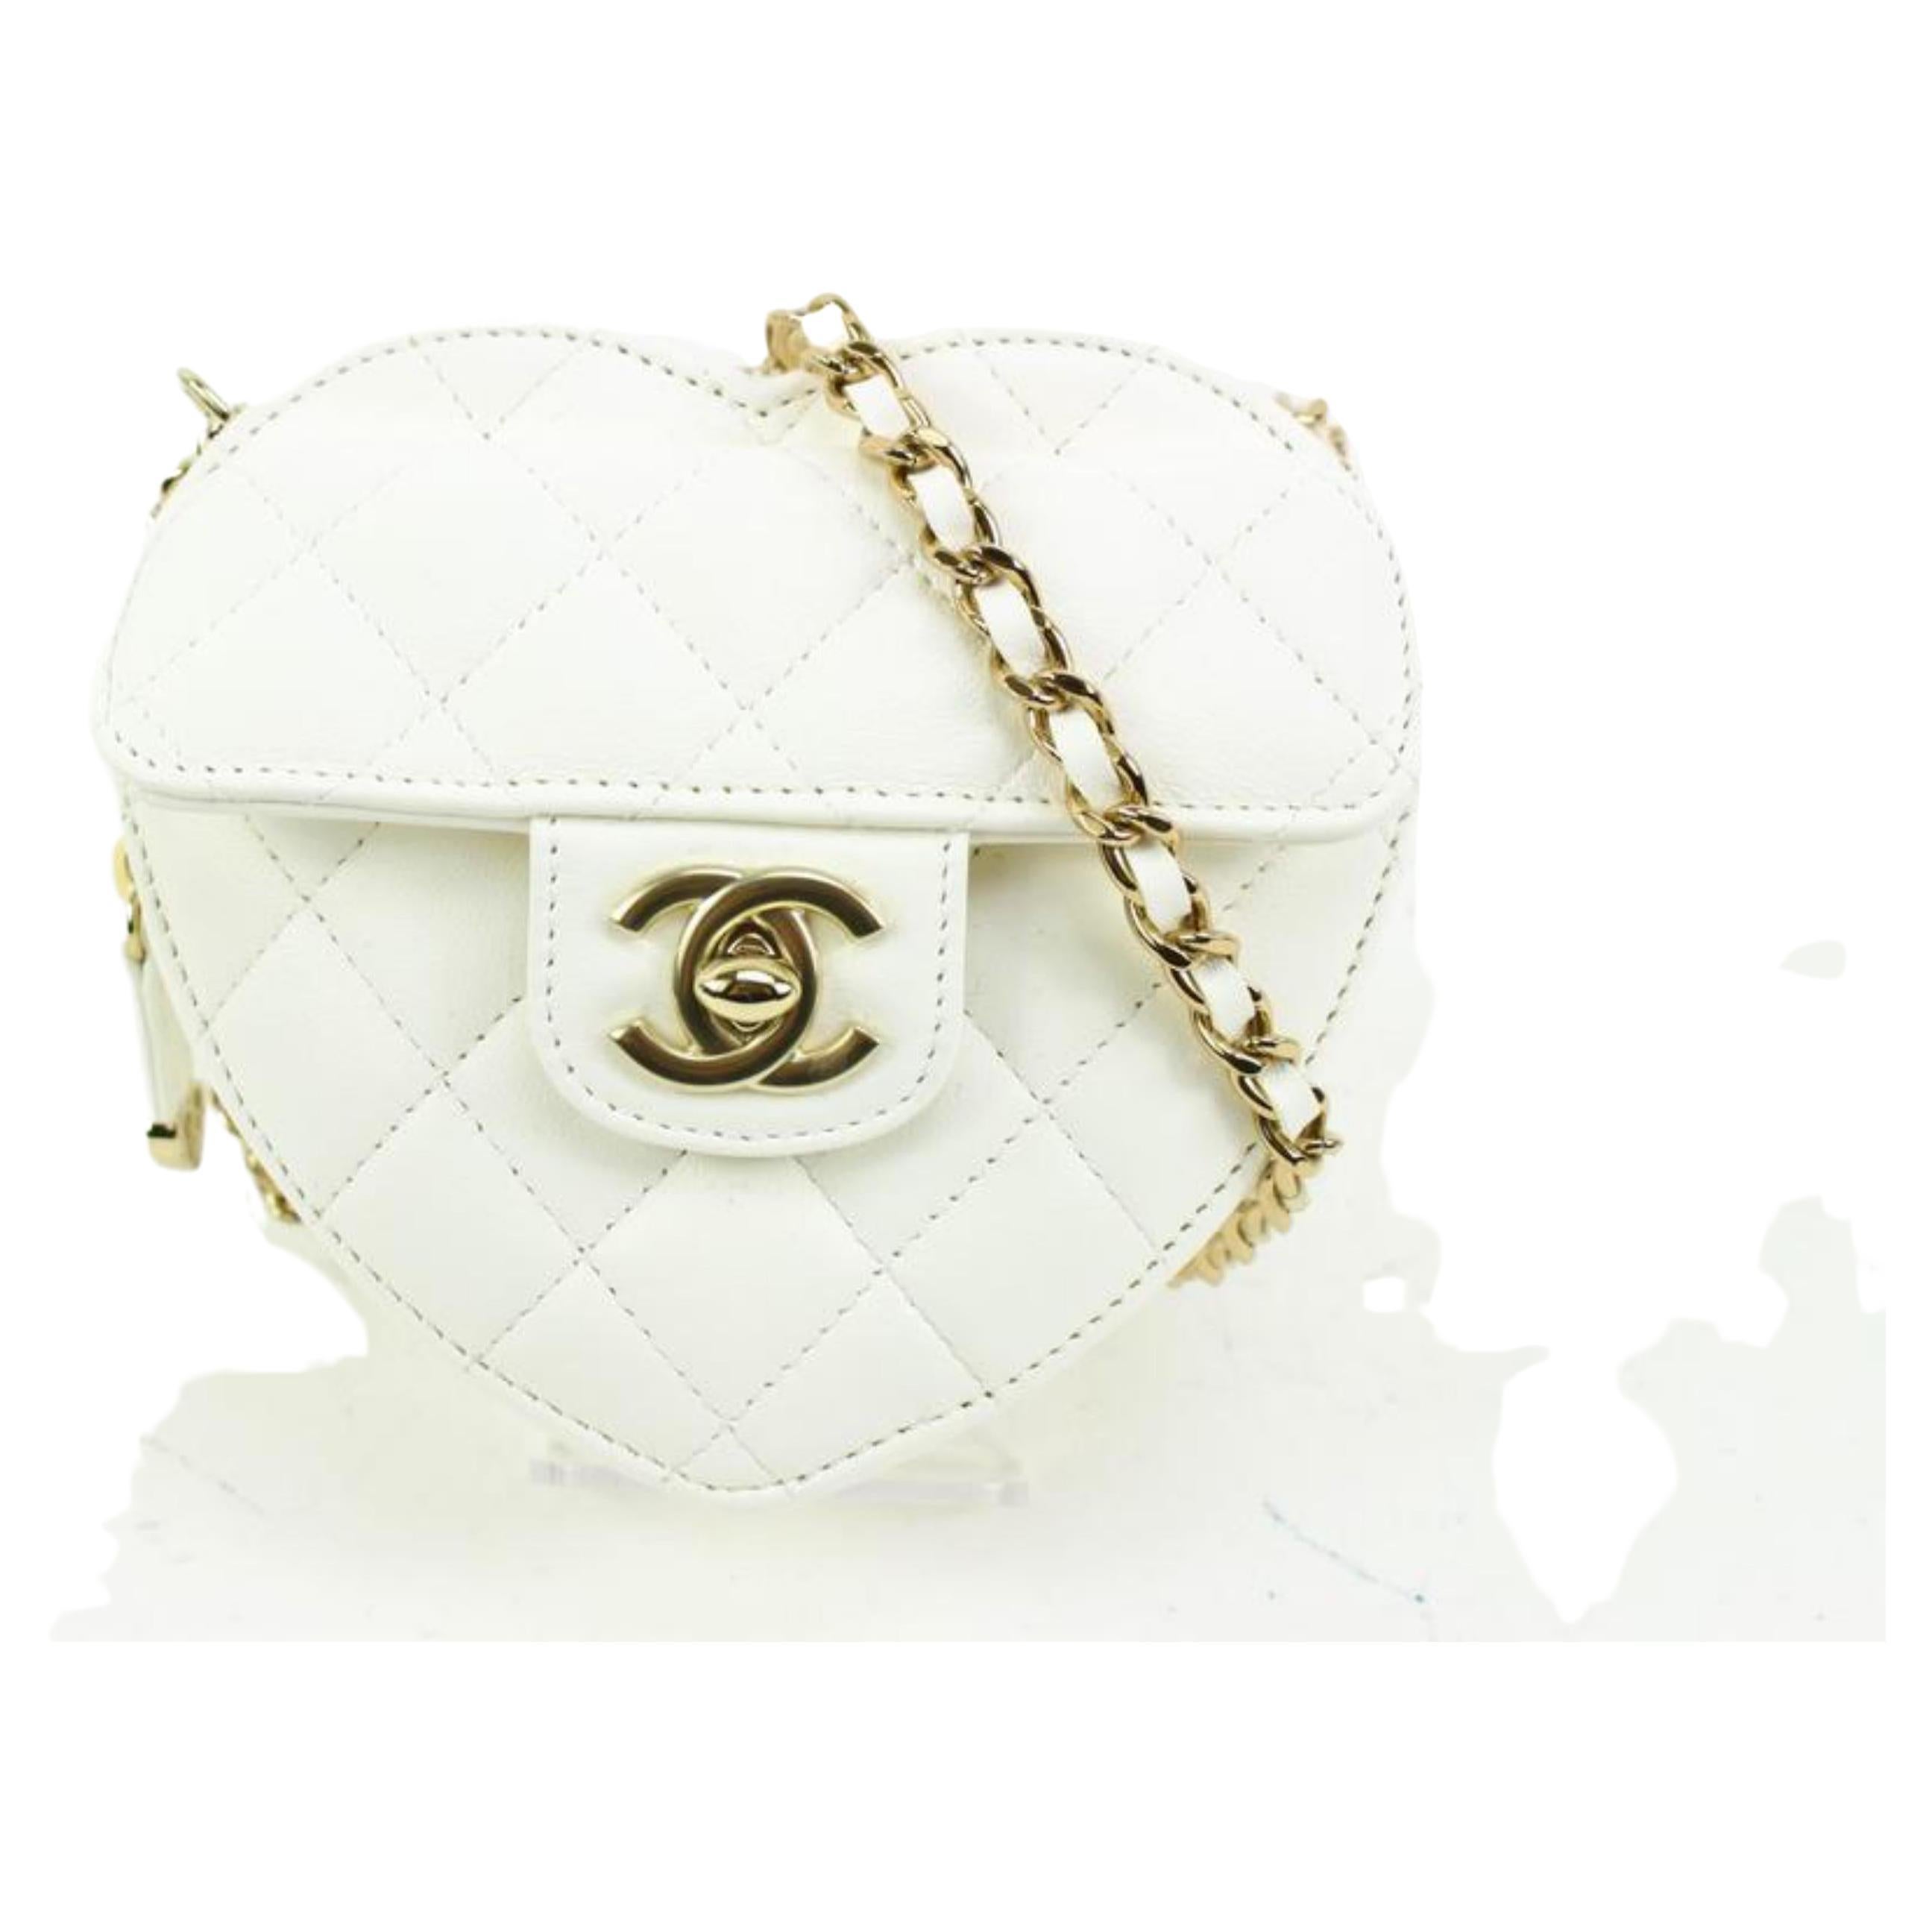 Chanel White Quilted Lambskin CC in Love Heart Bag Clutch on Chain 26cz420s